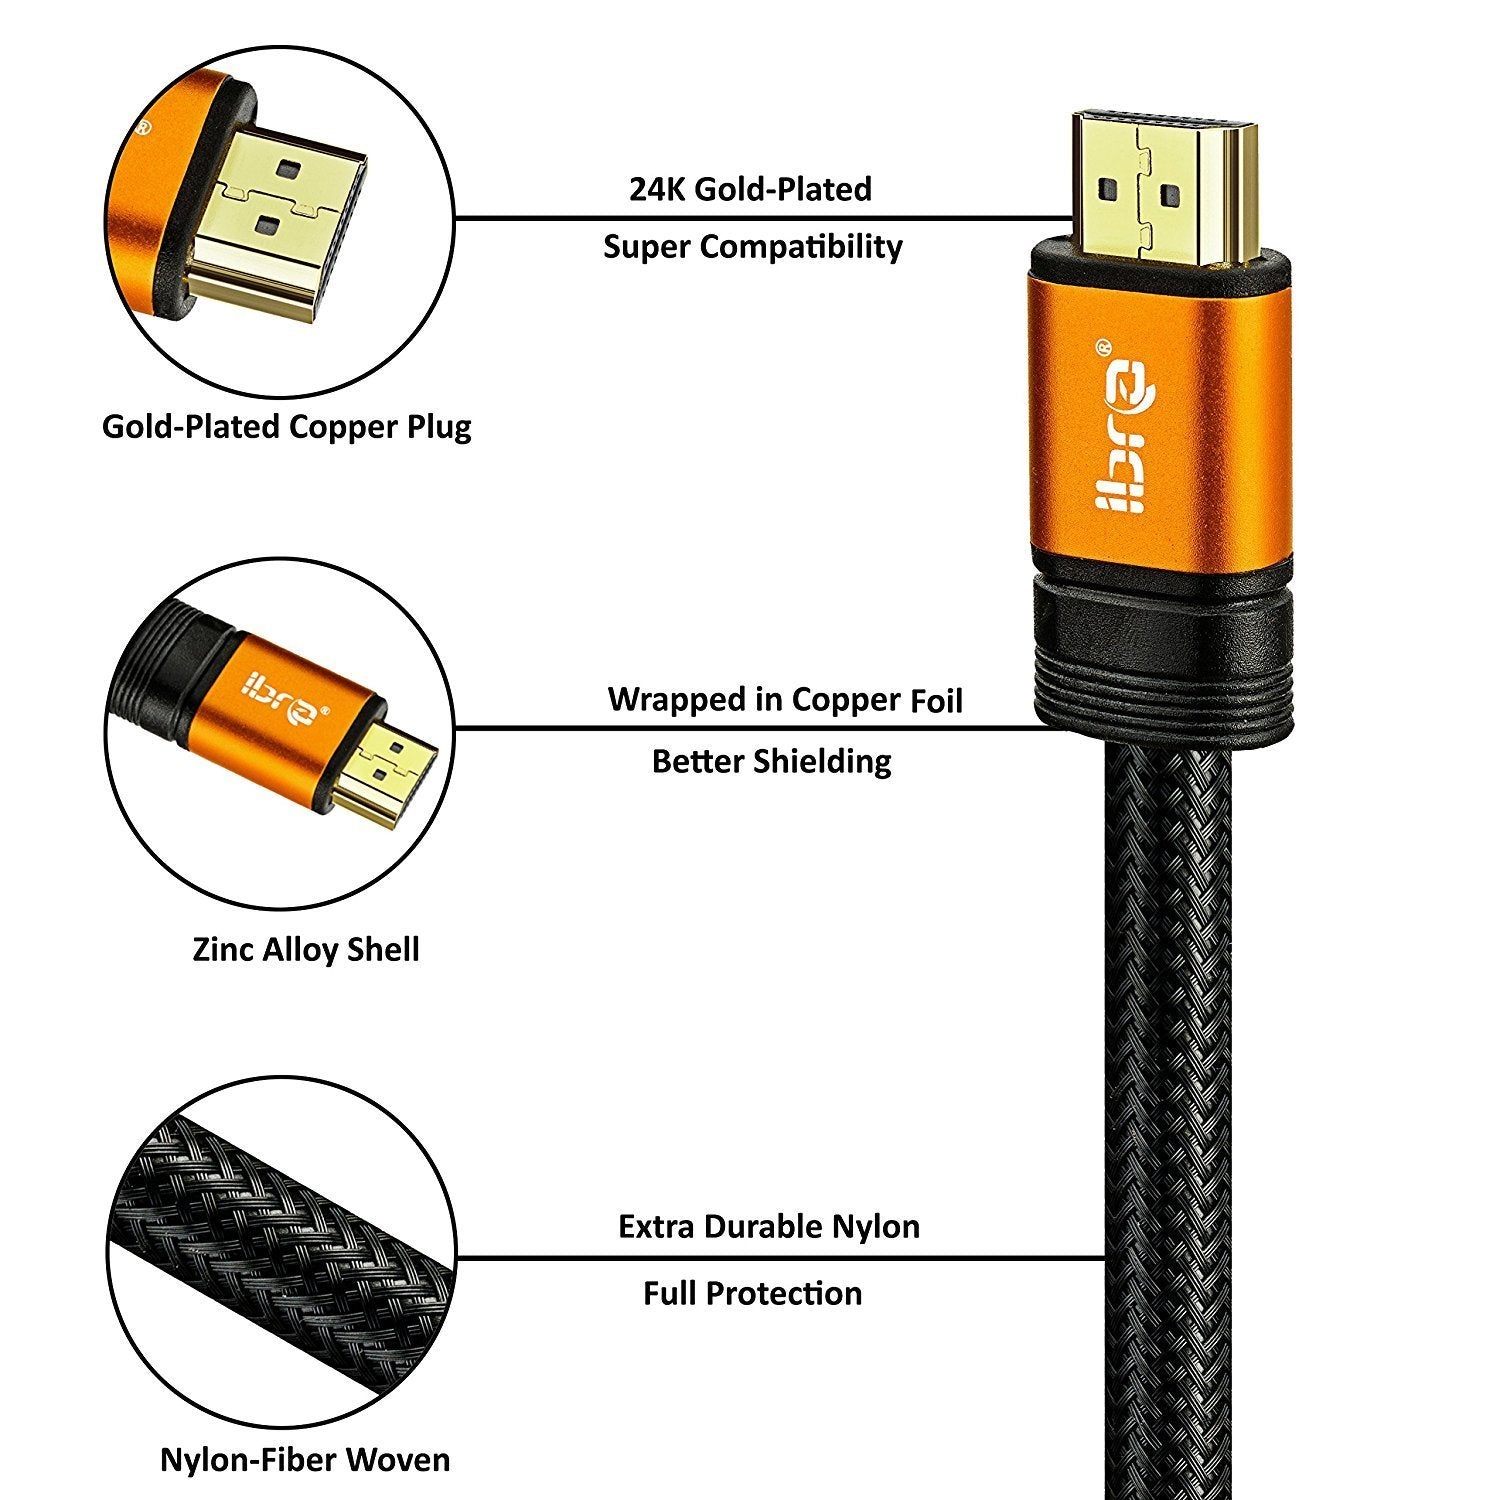 IBRA Orange HDMI Cable 6M - UHD HDMI 2.0 (4K@60Hz) Ready -18Gbps-28AWG Braided Cord -Gold Plated Connectors -Ethernet,Audio Return-Video 4K 2160p,HD 1080p,3D -Xbox PlayStation PS3 PS4 PC Apple TV